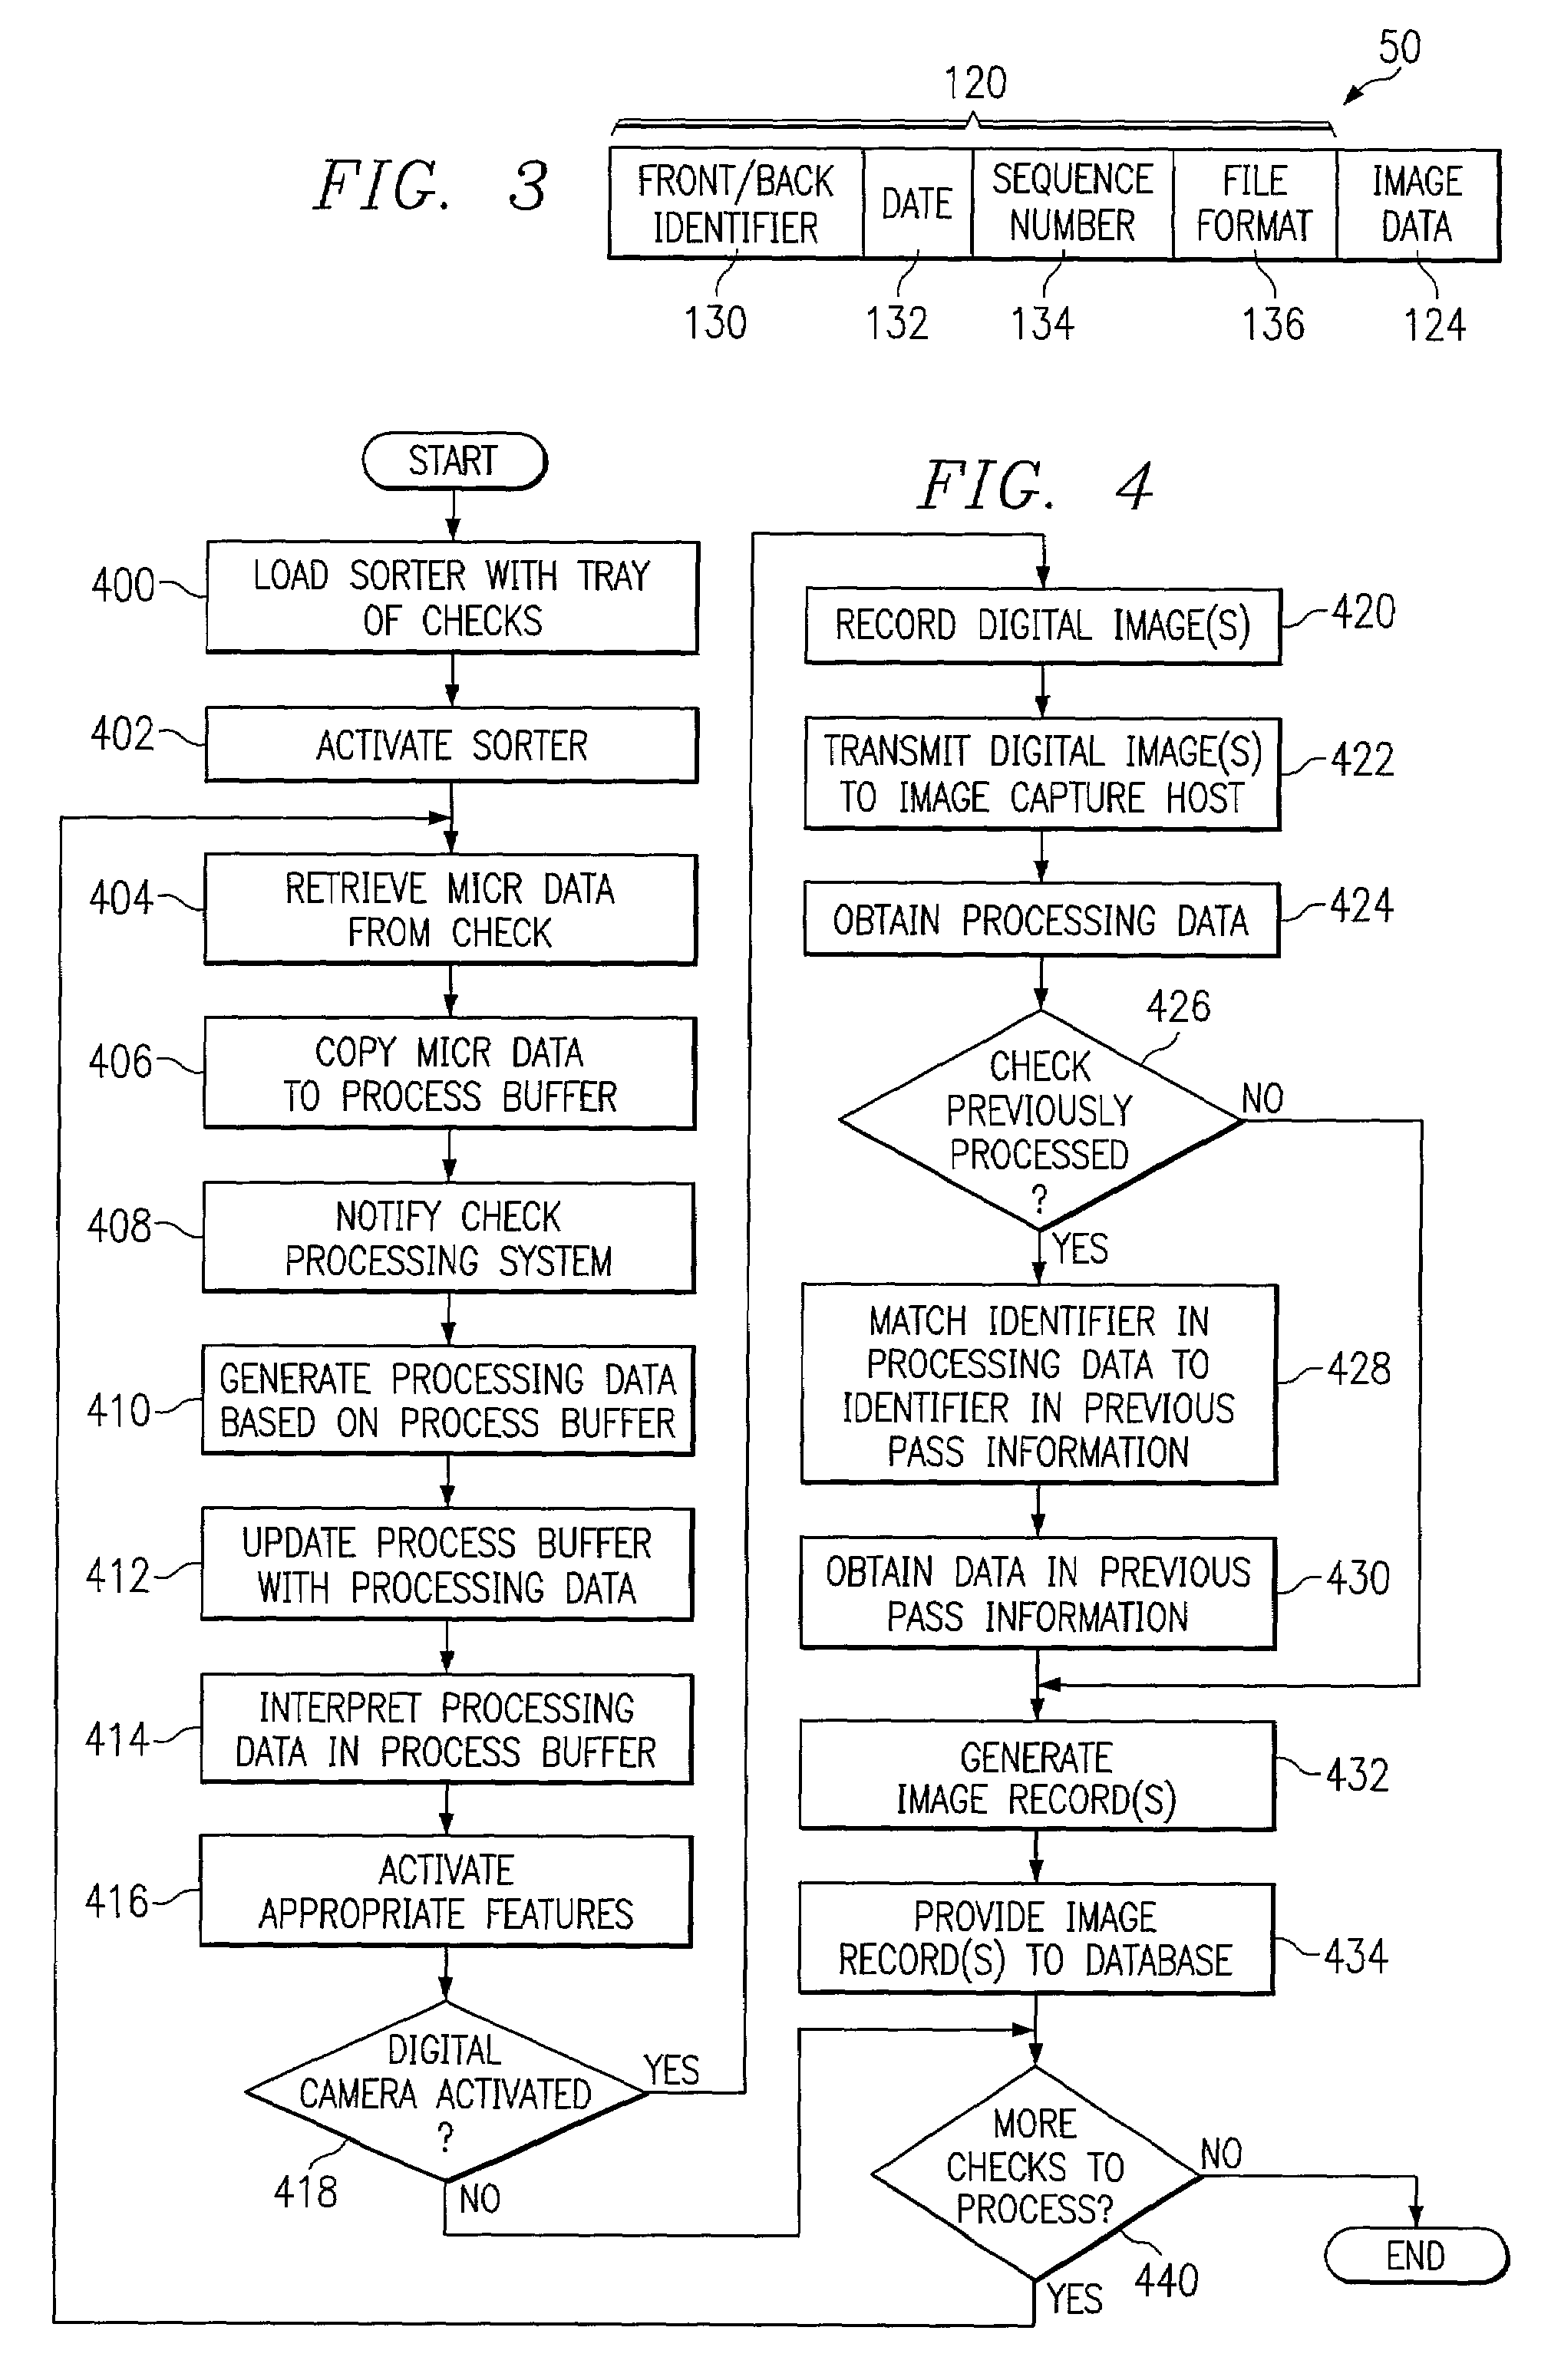 Method and system for processing images for a check sorter